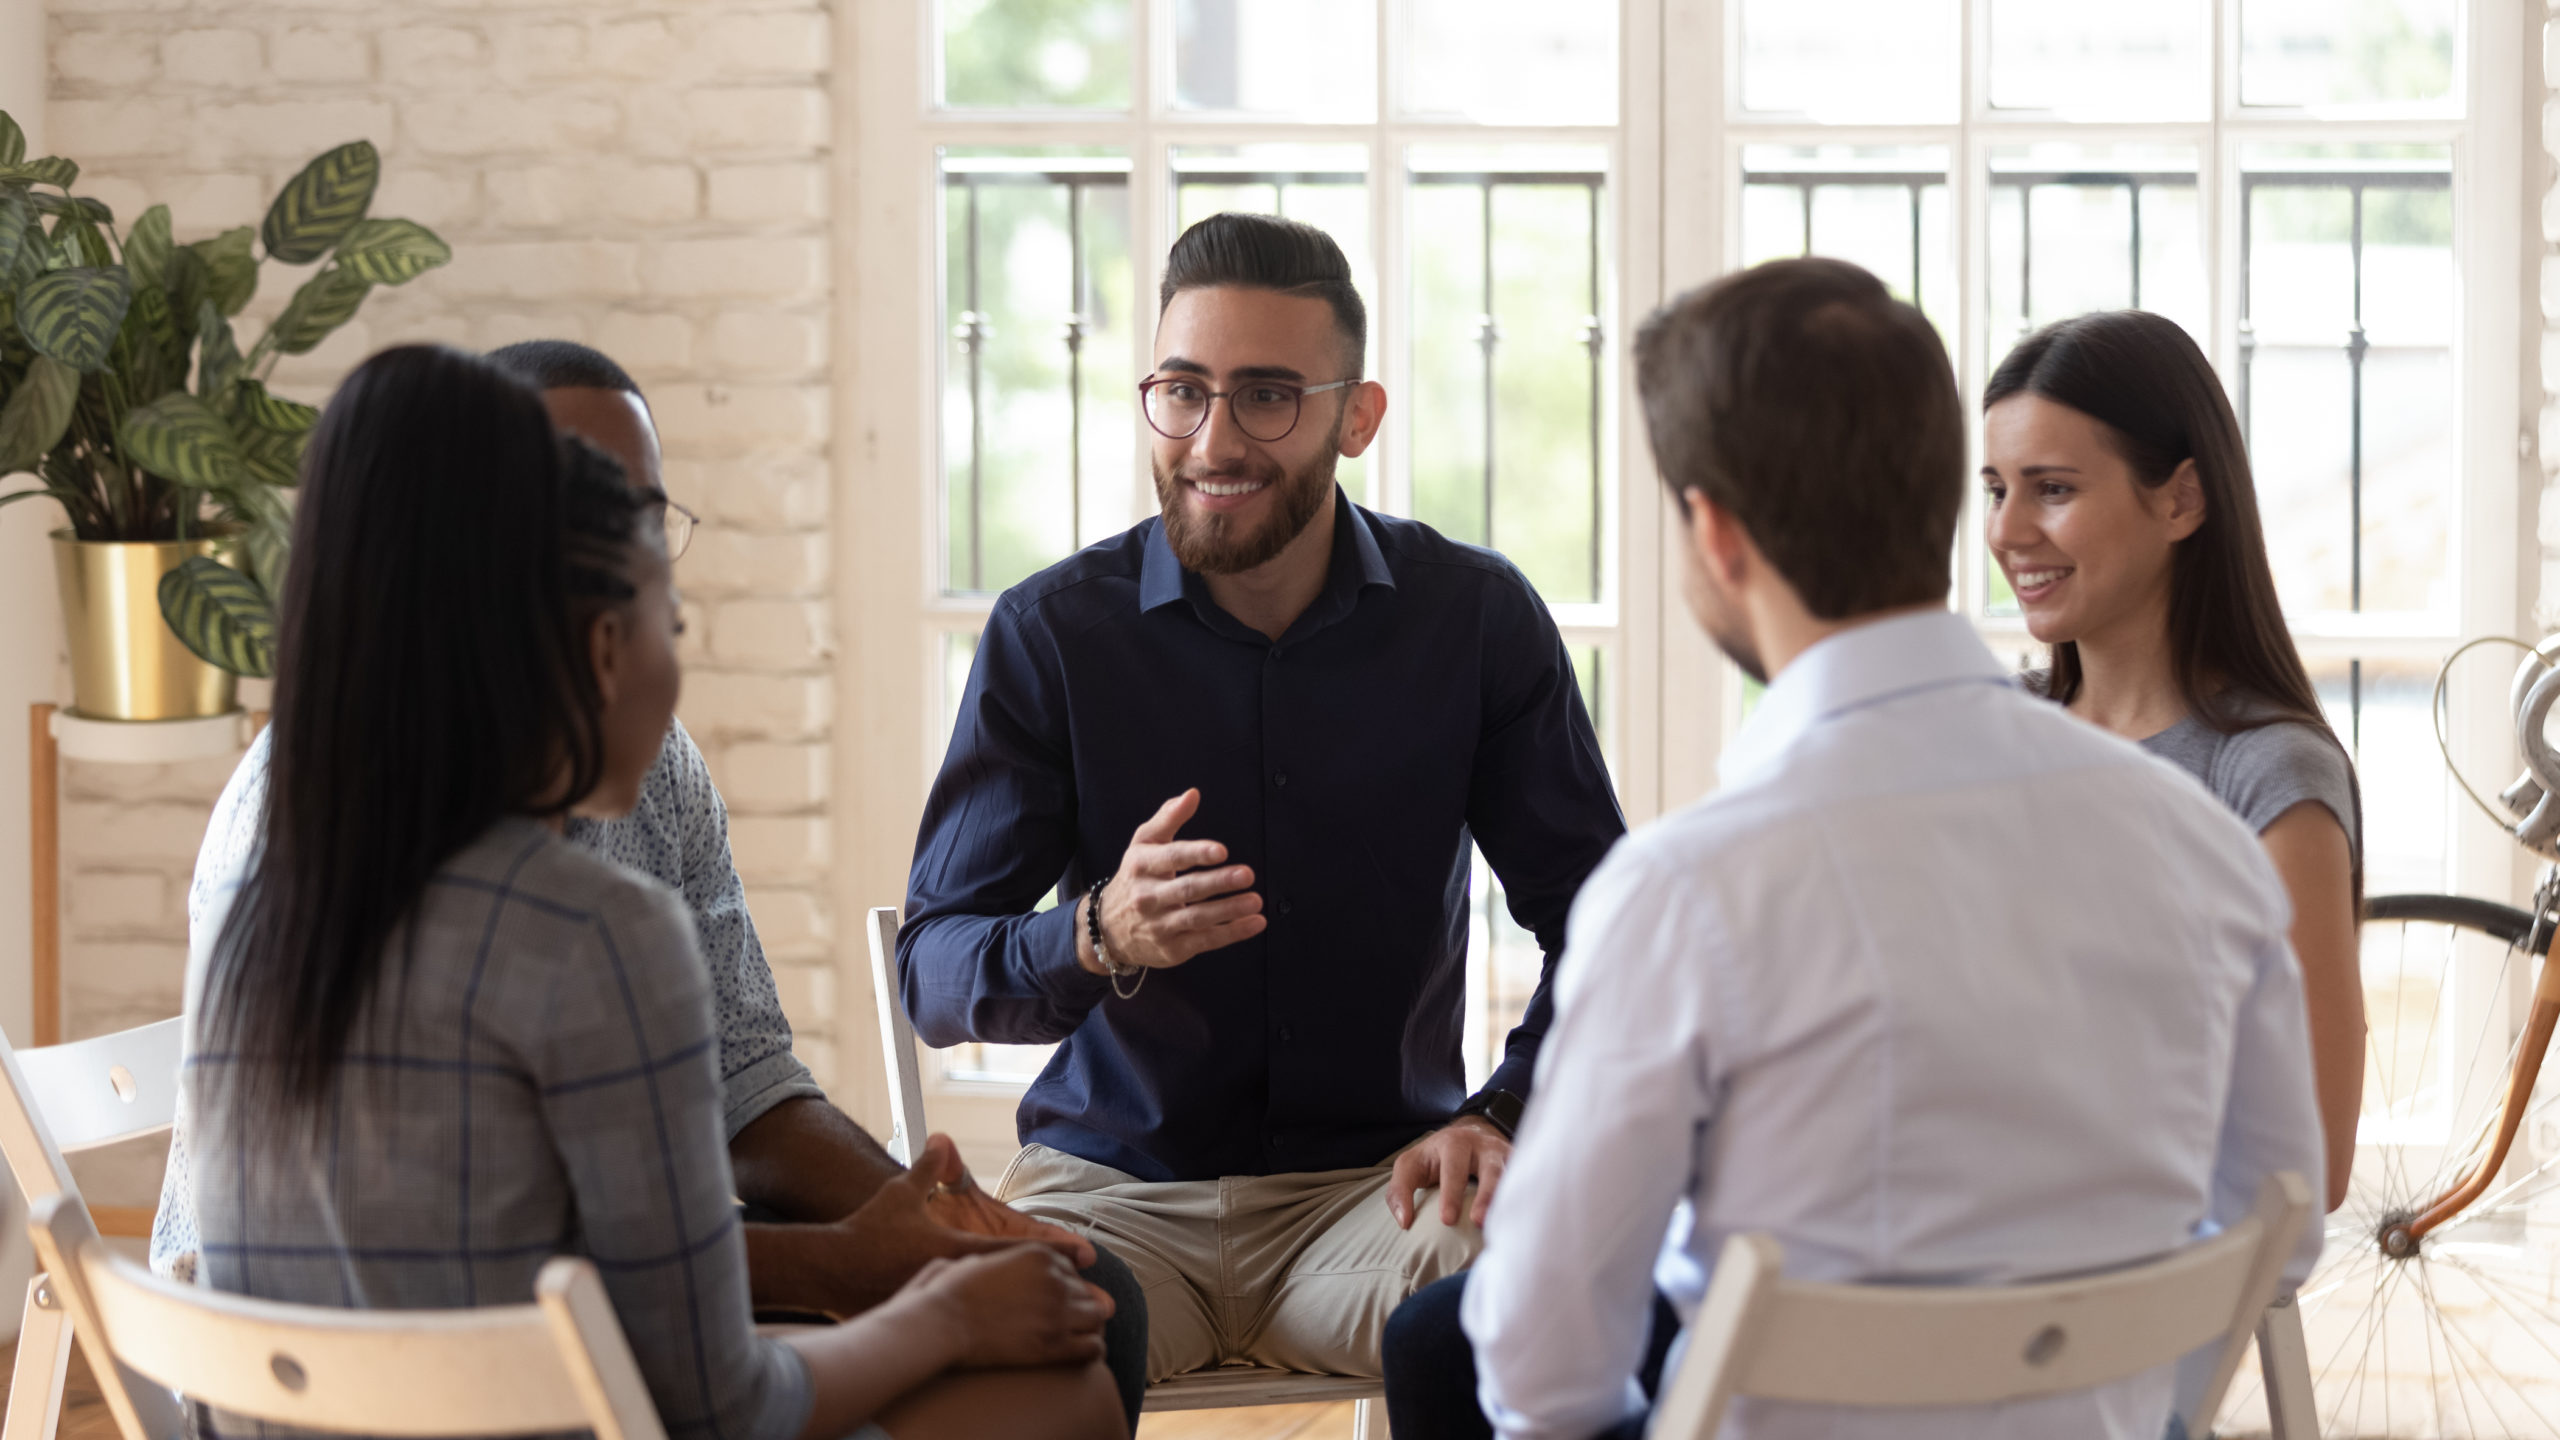 Diverse people speak share problems at therapy session